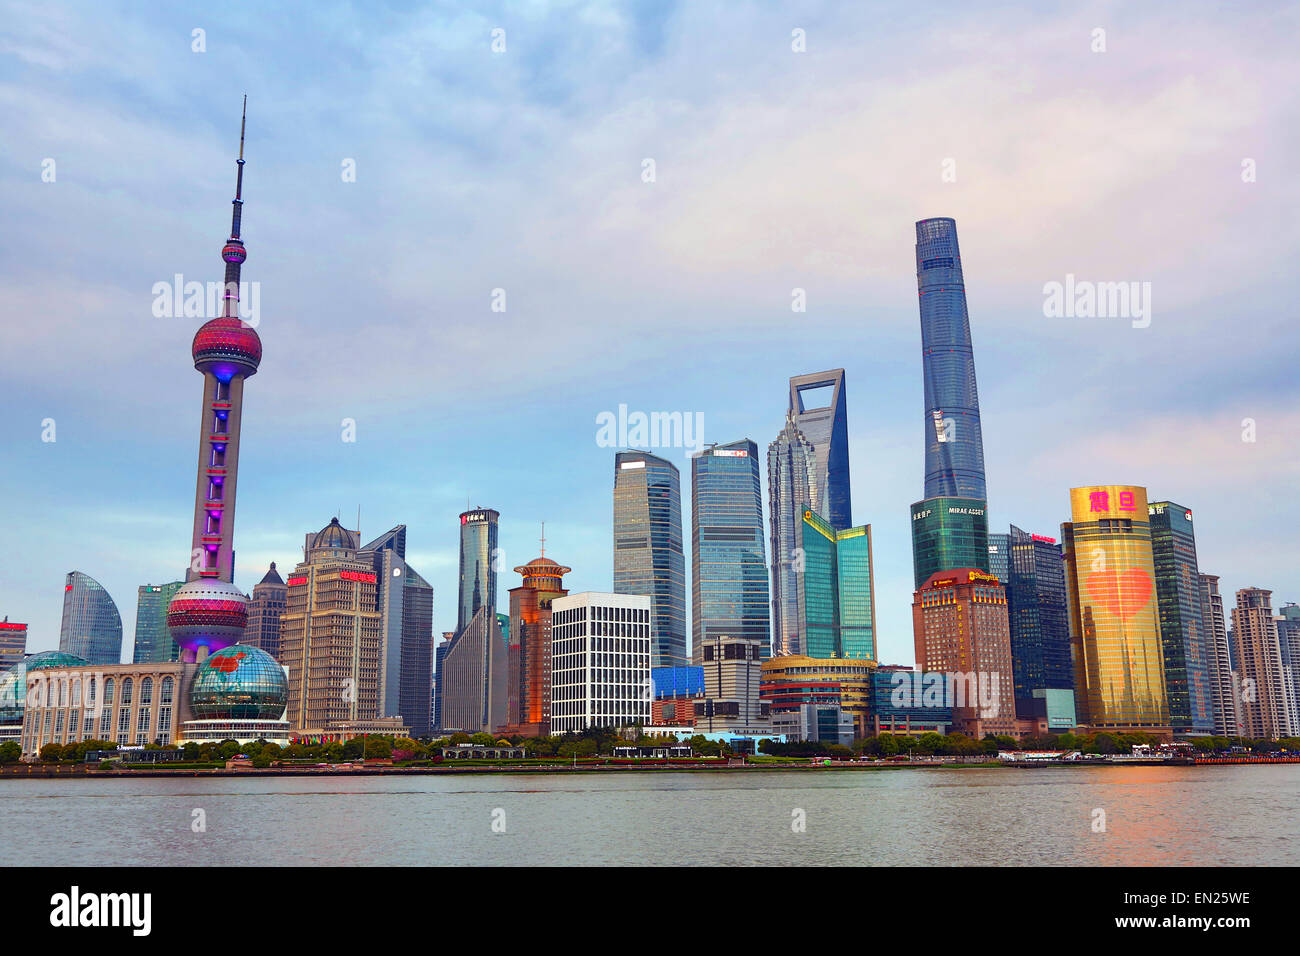 General view of the Pudong city skyline in Shanghai with the Oriental Pearl TV Tower, Shanghai, China Stock Photo